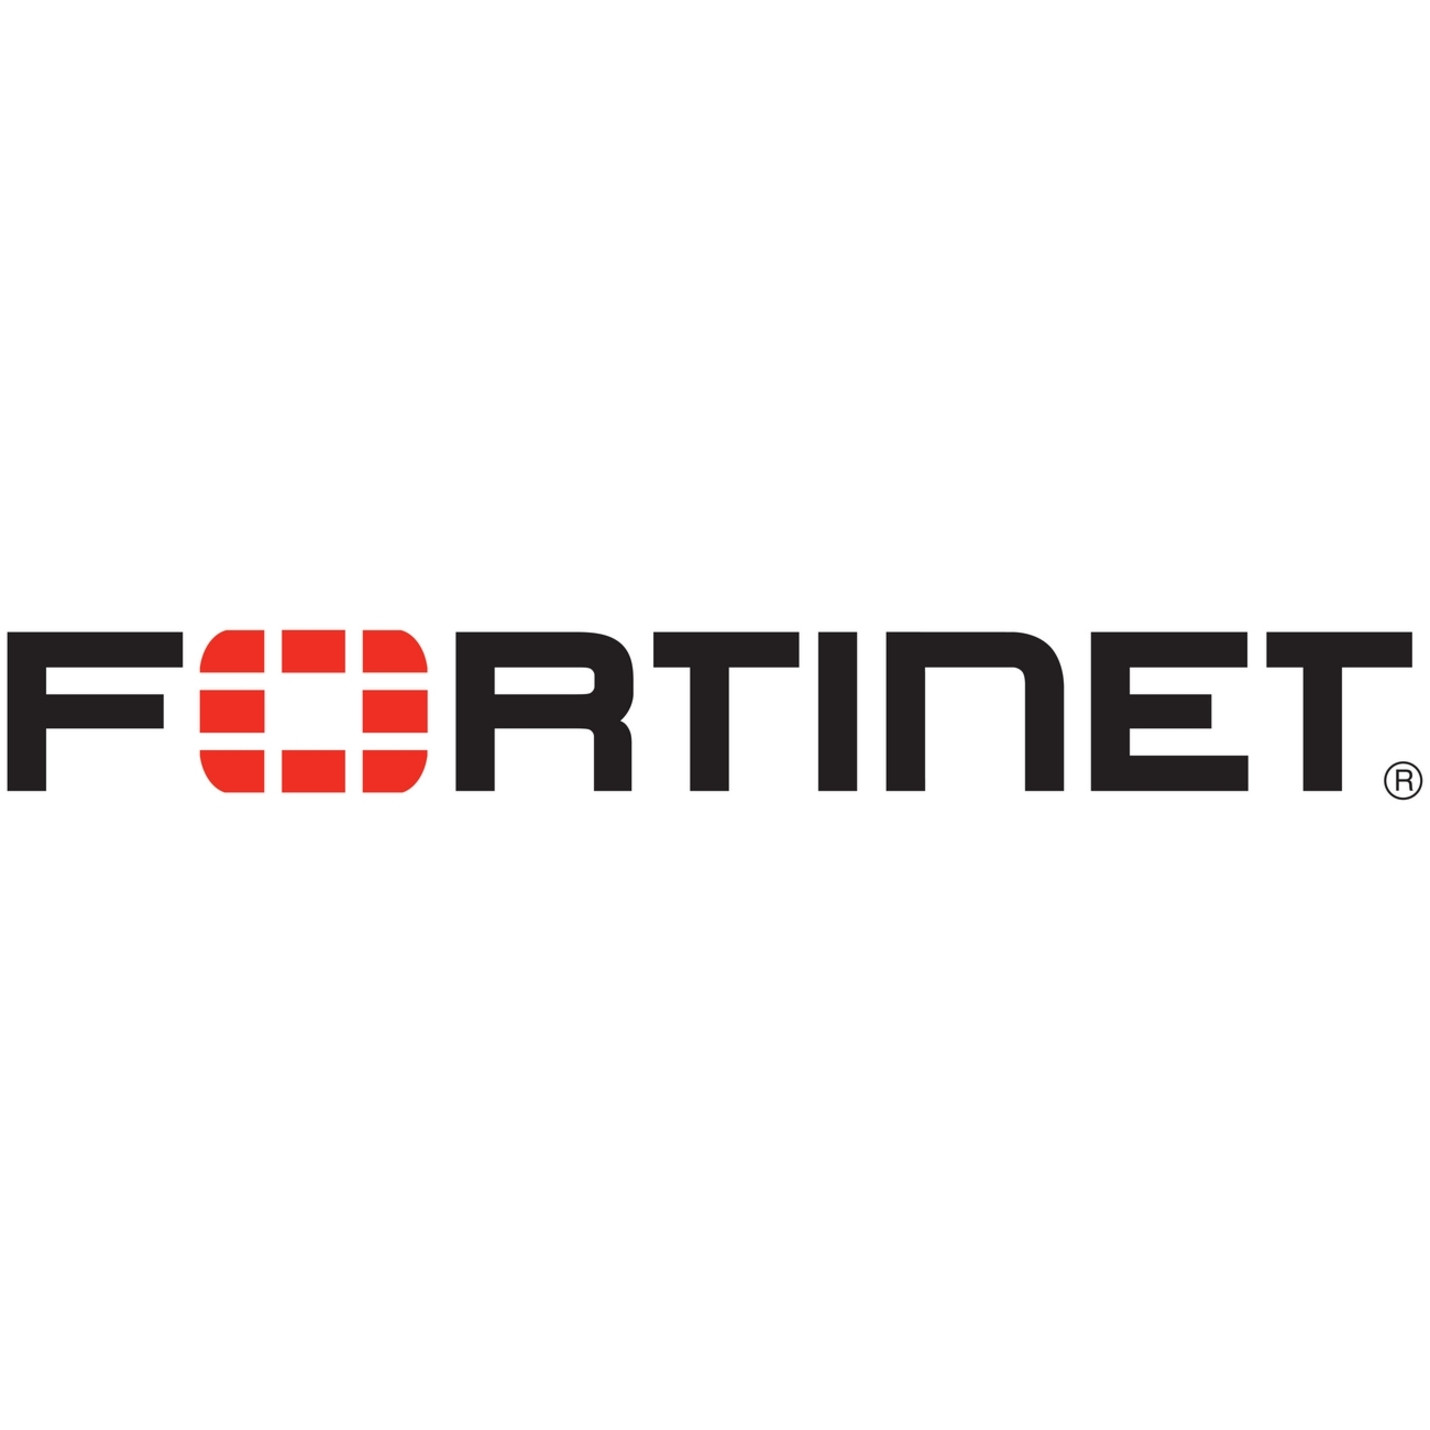 Fortinet Wall Mount for Network Security & Firewall Device SP-FG-50B-60B-MOUNT